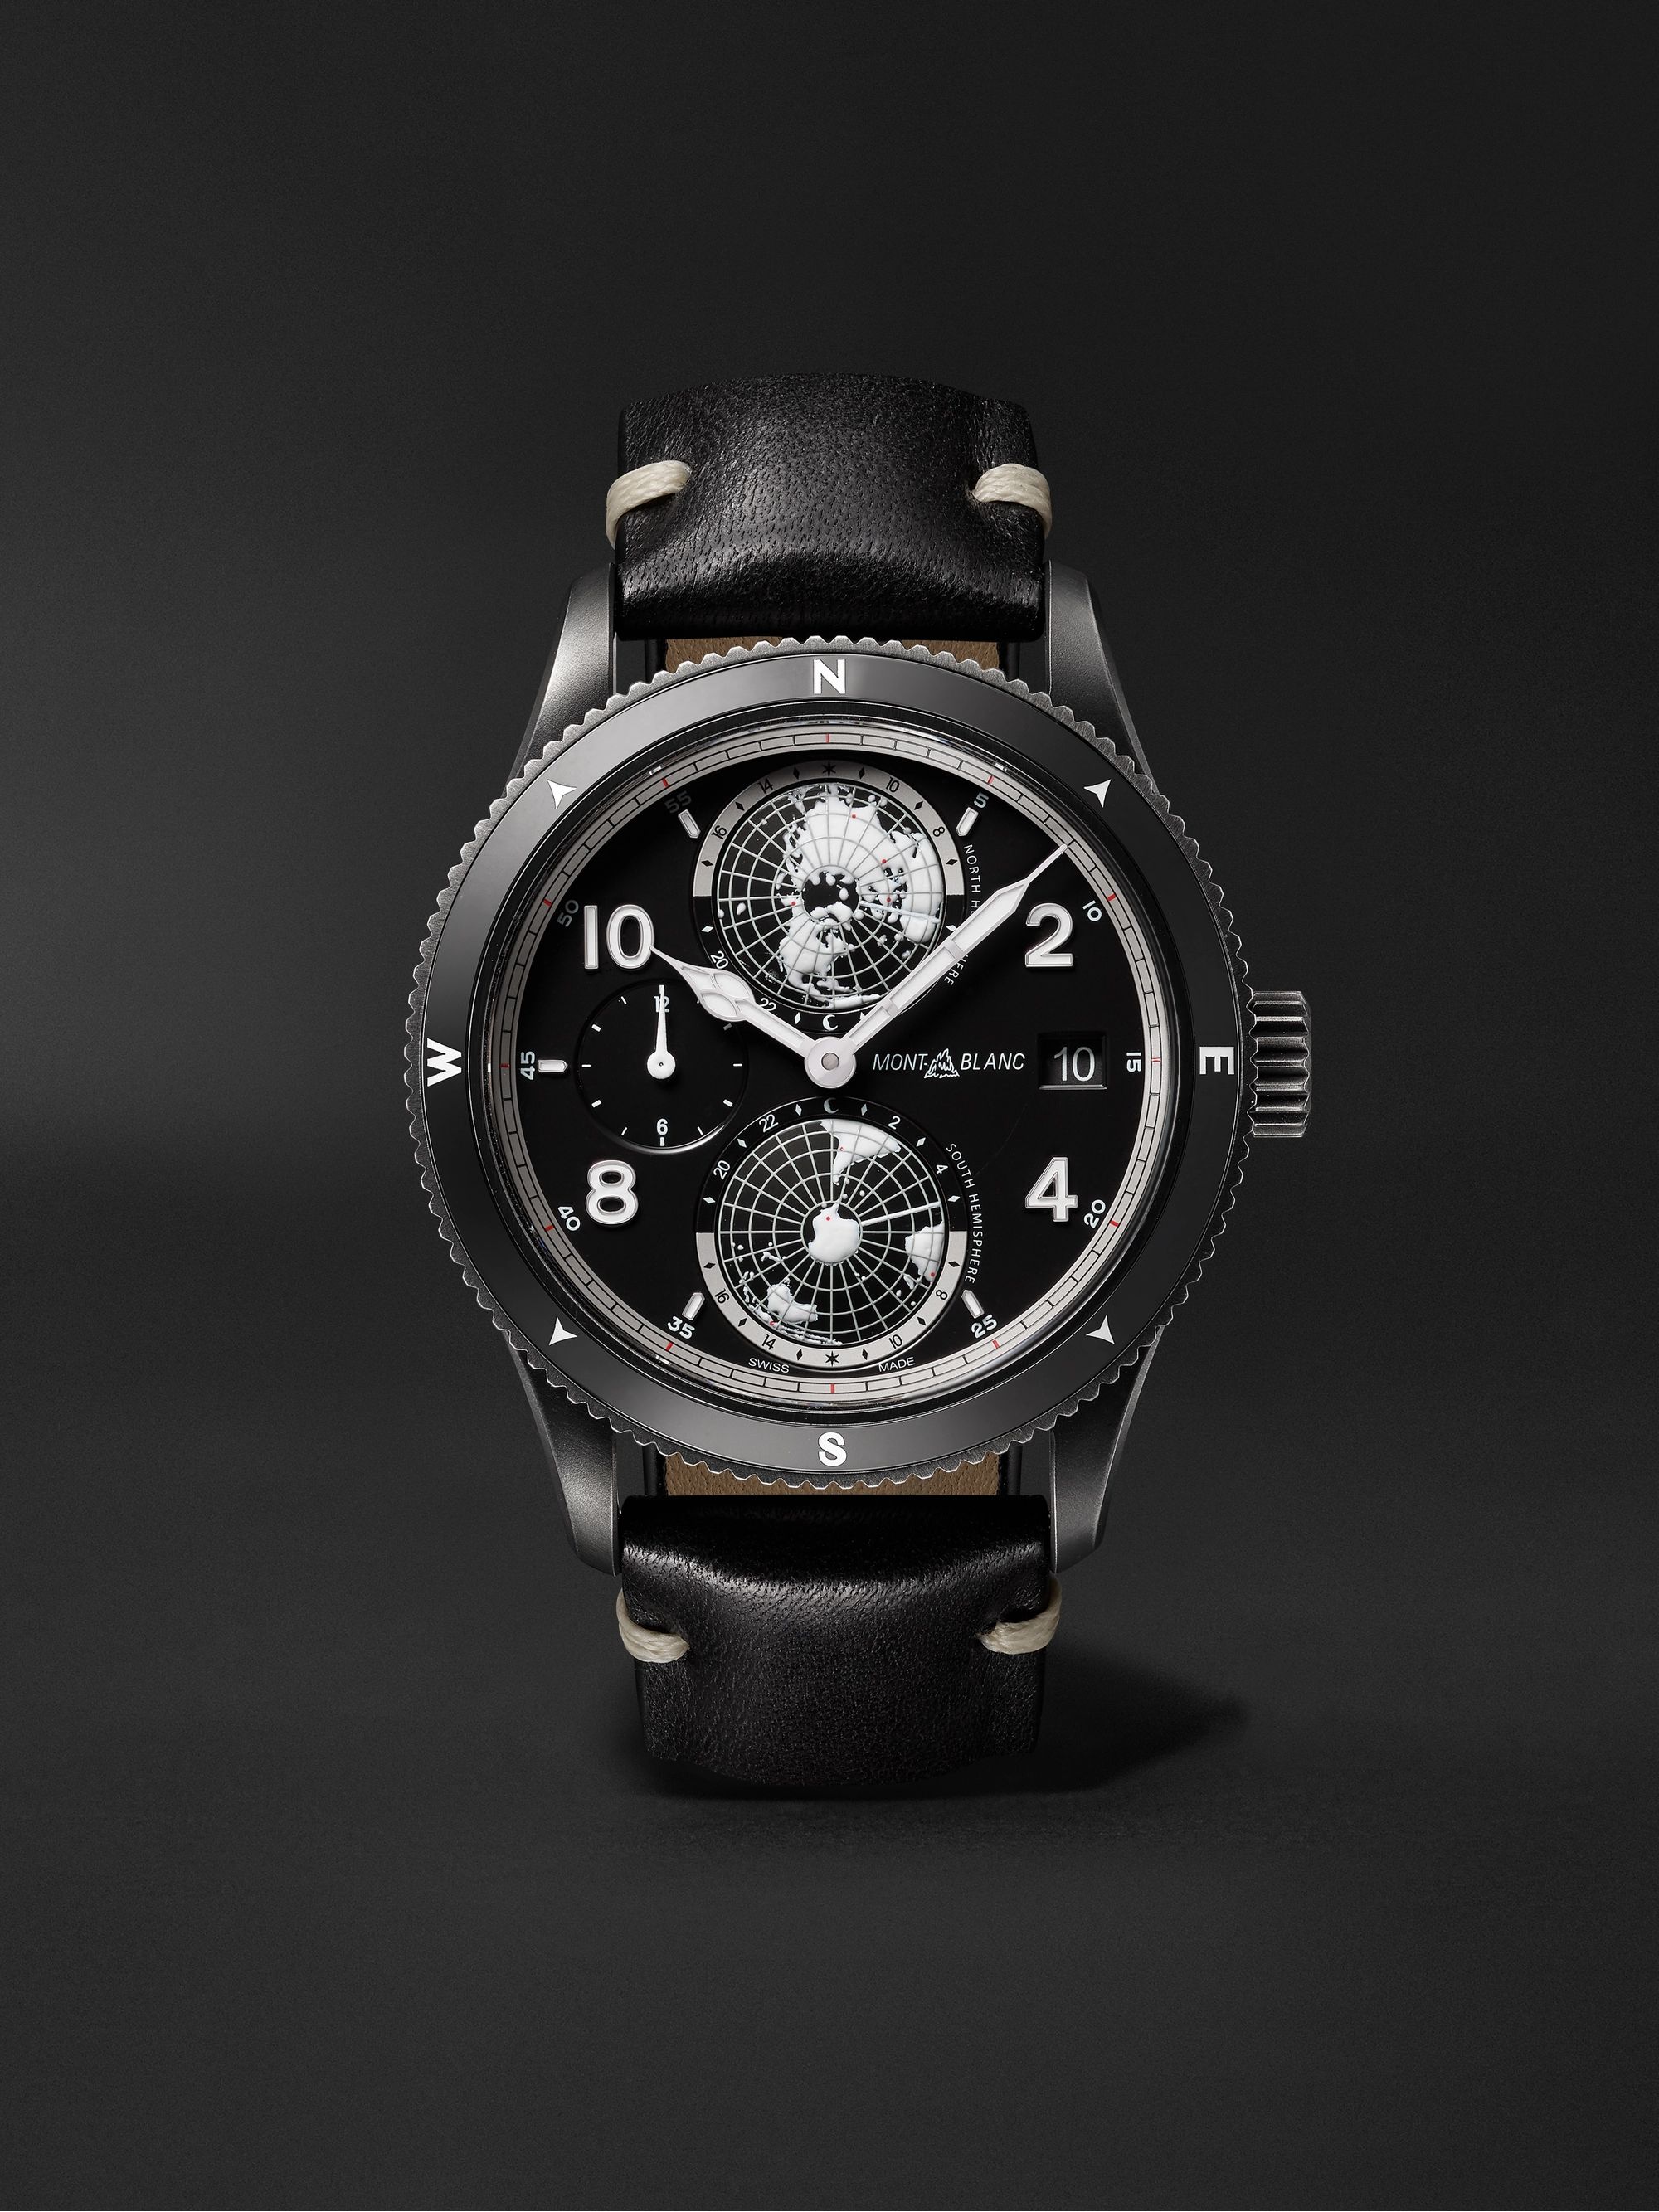 MONTBLANC 1858 Geosphere Limited Edition Automatic 42mm Distressed Stainless Steel and Leather Watch, Ref. No. 128257